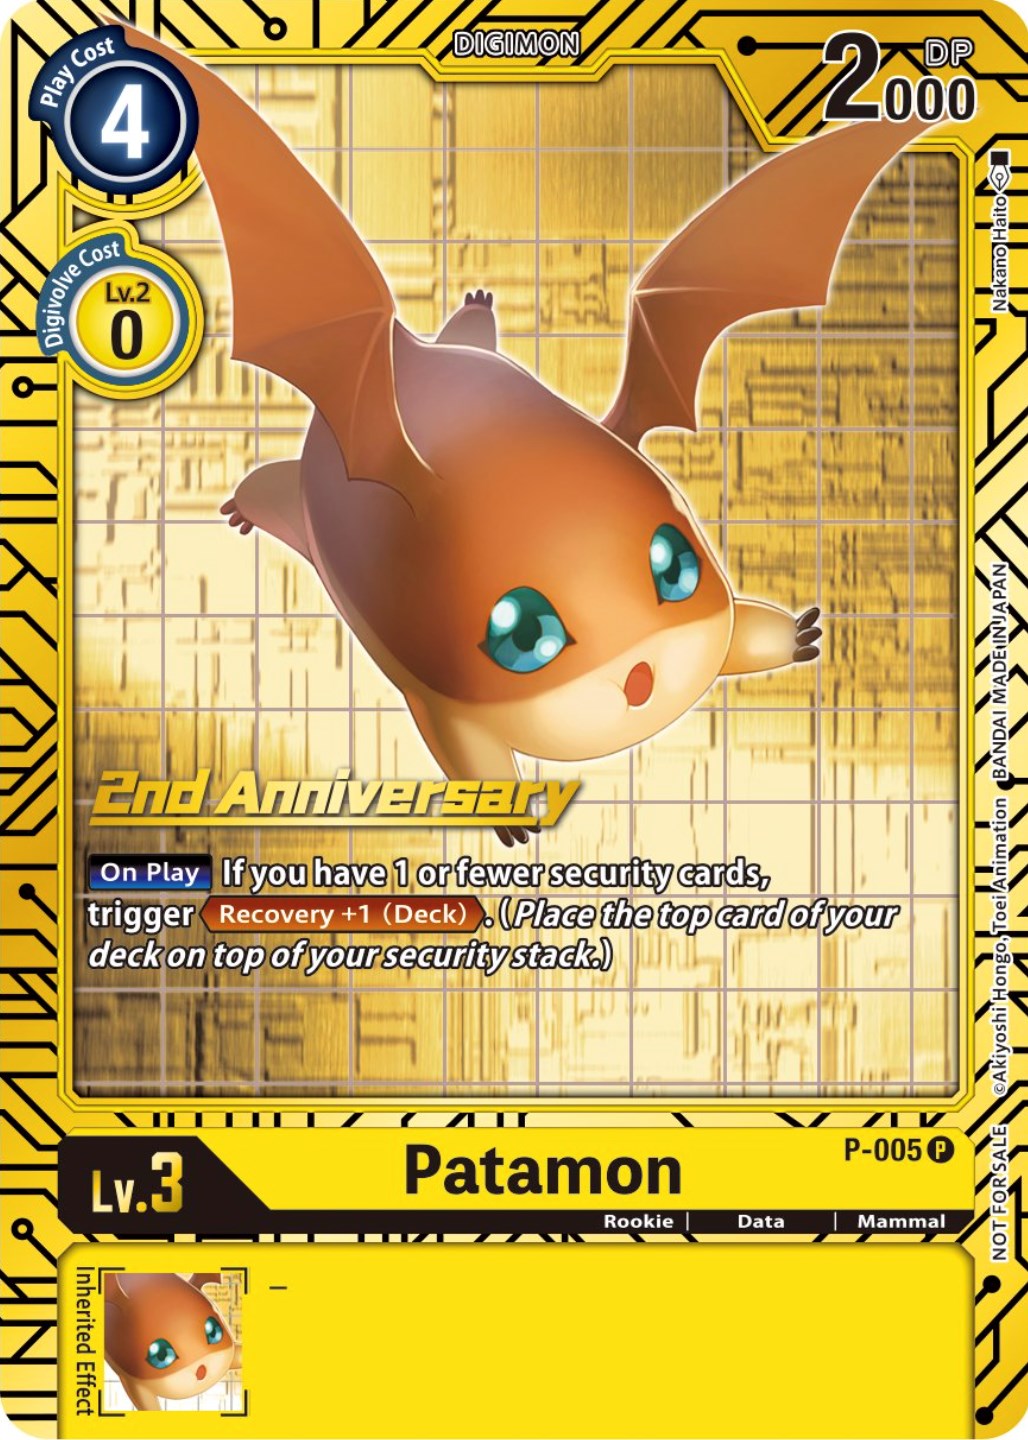 Patamon [P-005] (2nd Anniversary Card Set) [Promotional Cards] | The Time Vault CA